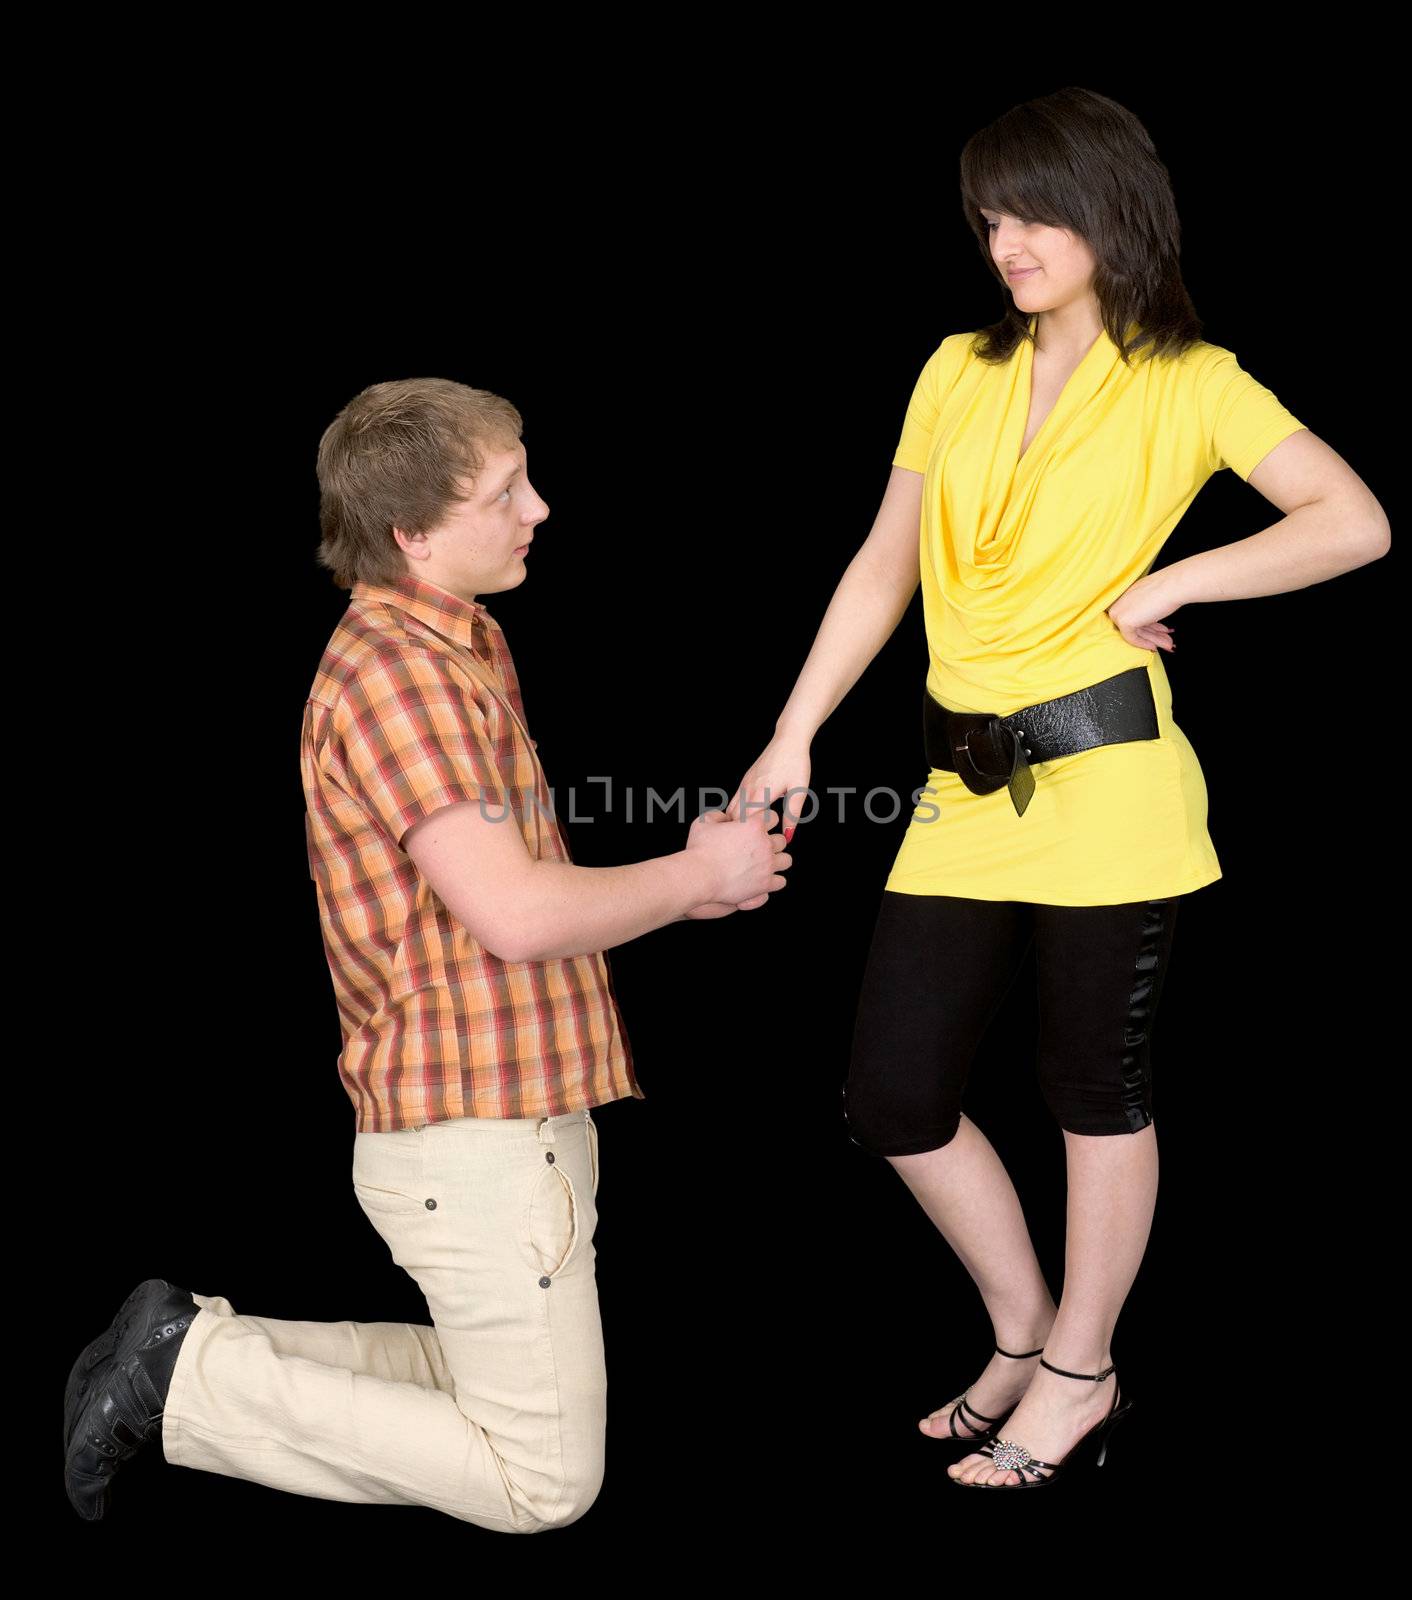 The man is kneeling to the young woman